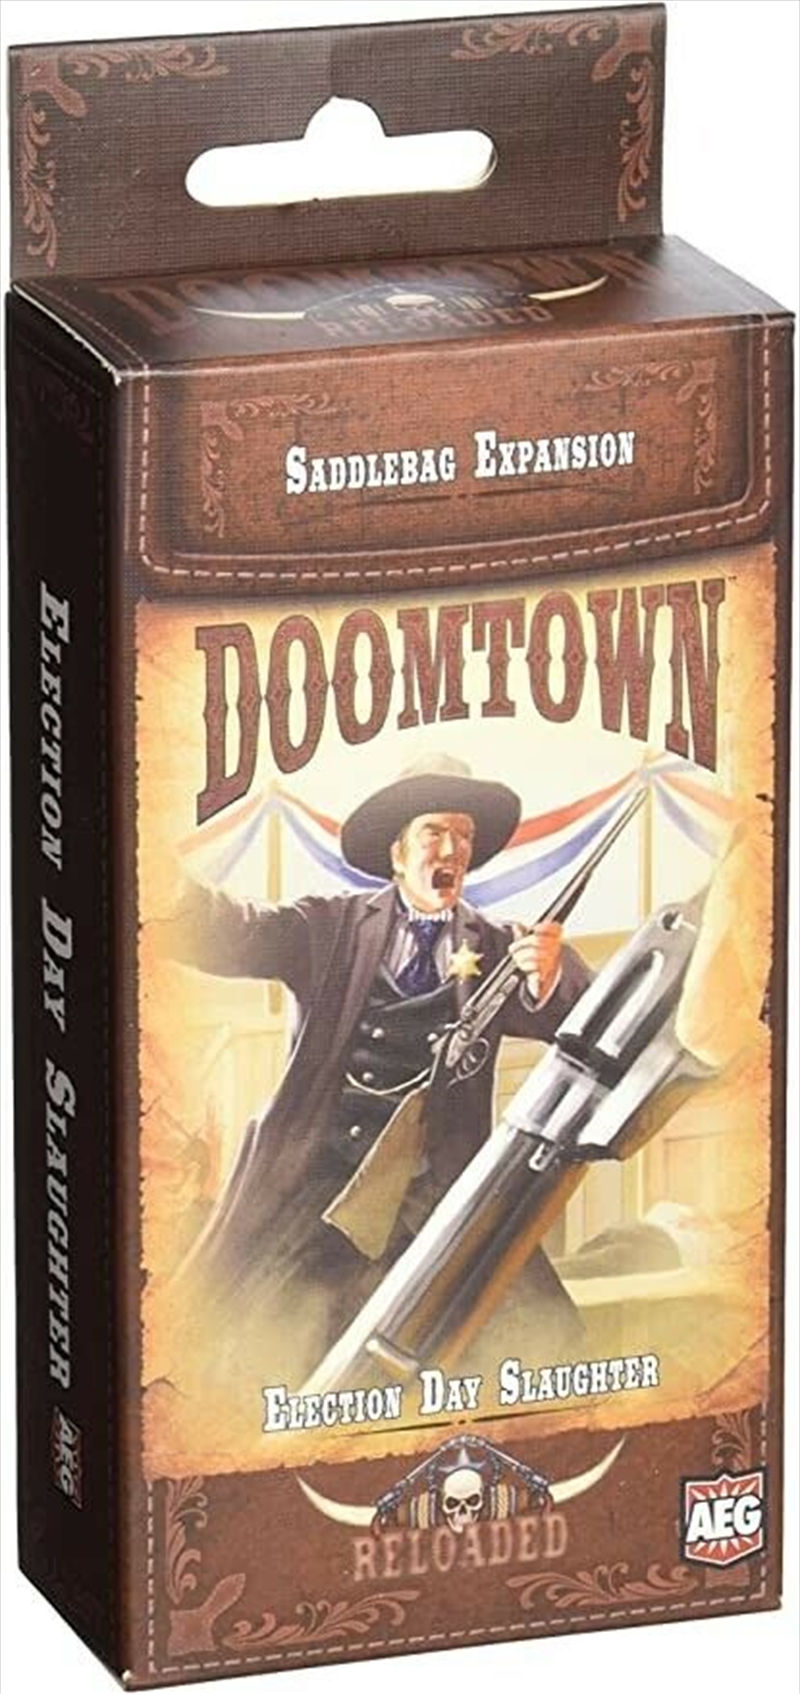 Doomtown Reloaded - Election Day Slaughter Expansion/Product Detail/Card Games